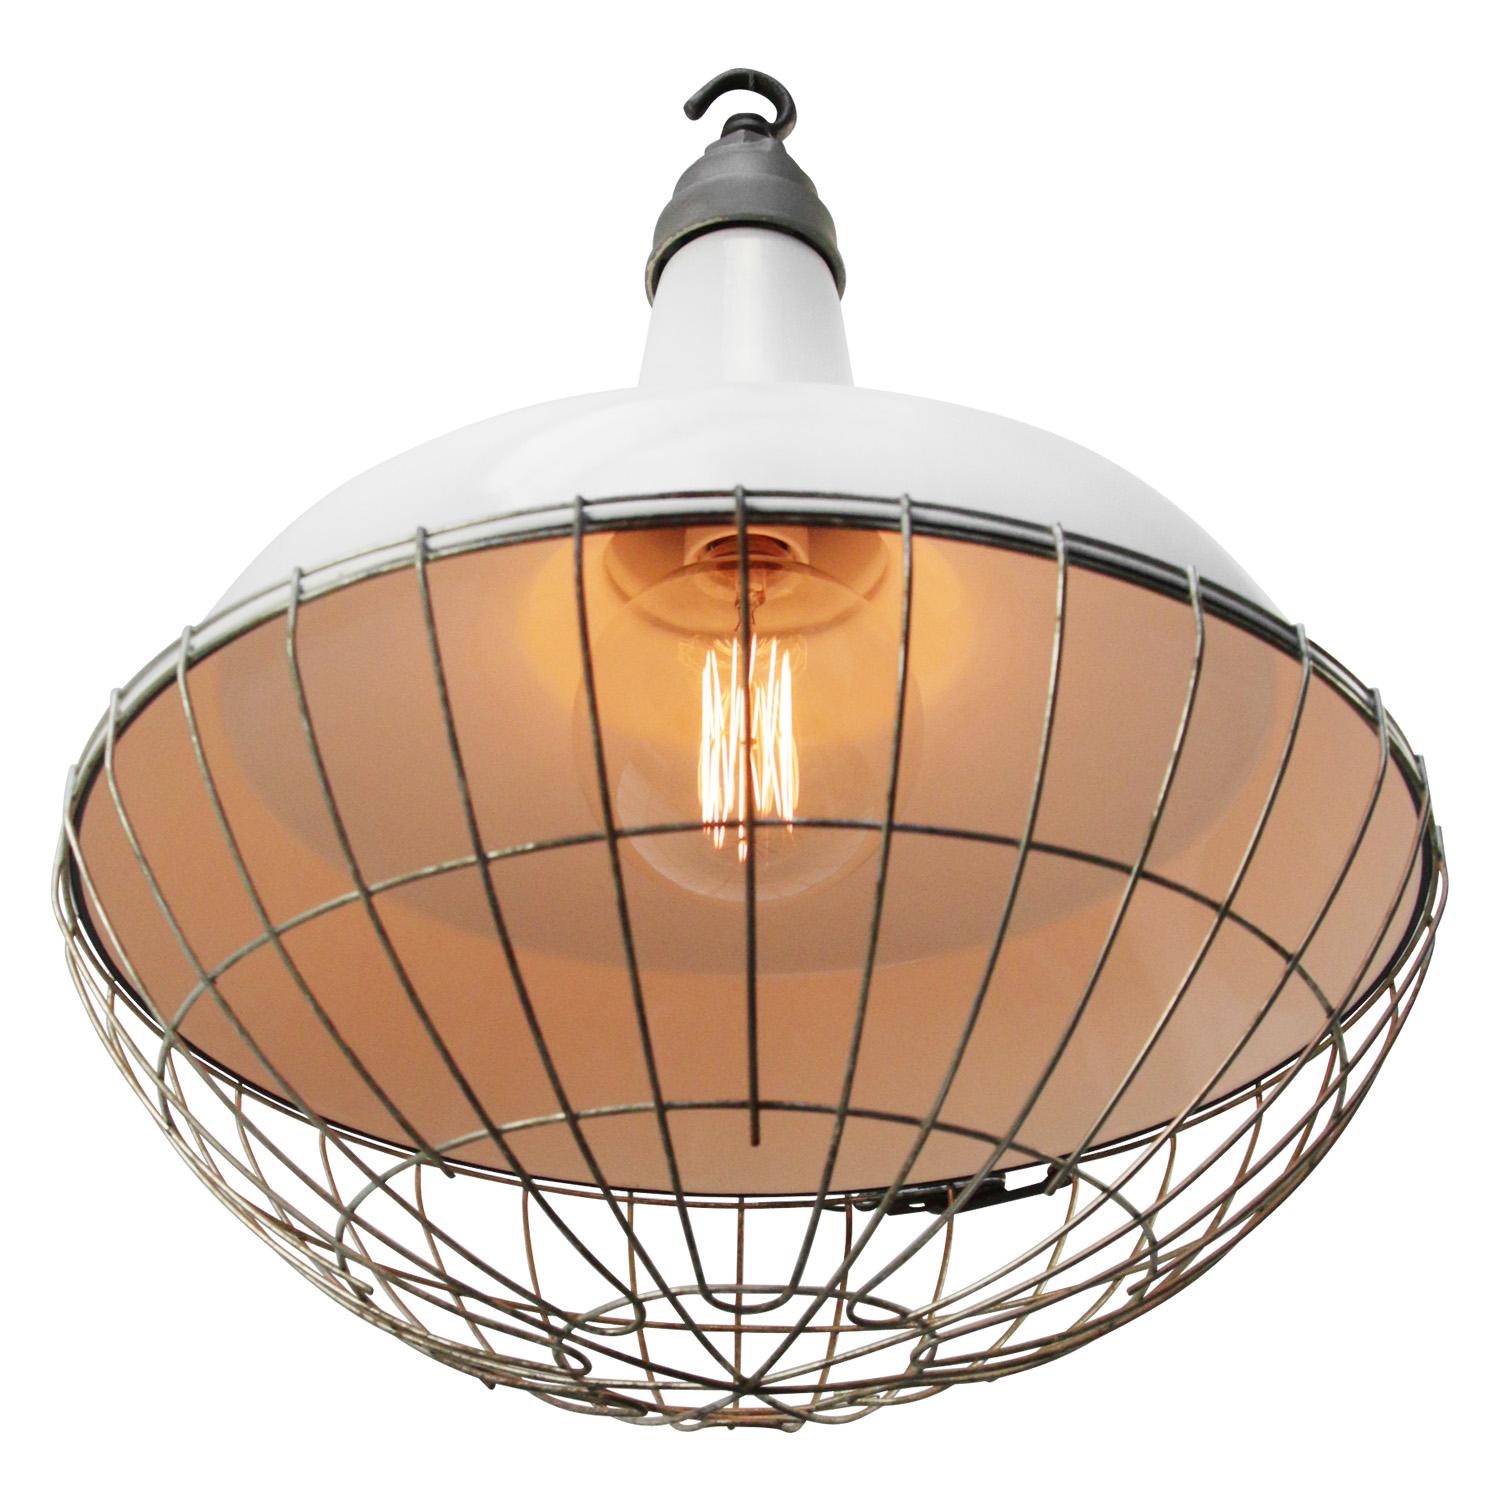 American industrial factory pendant light by Benjamin
white enamel, white interior.
Metal top and cage

Weight 3.00 kg / 6.6 lb

Priced per individual item. All lamps have been made suitable by international standards for incandescent light